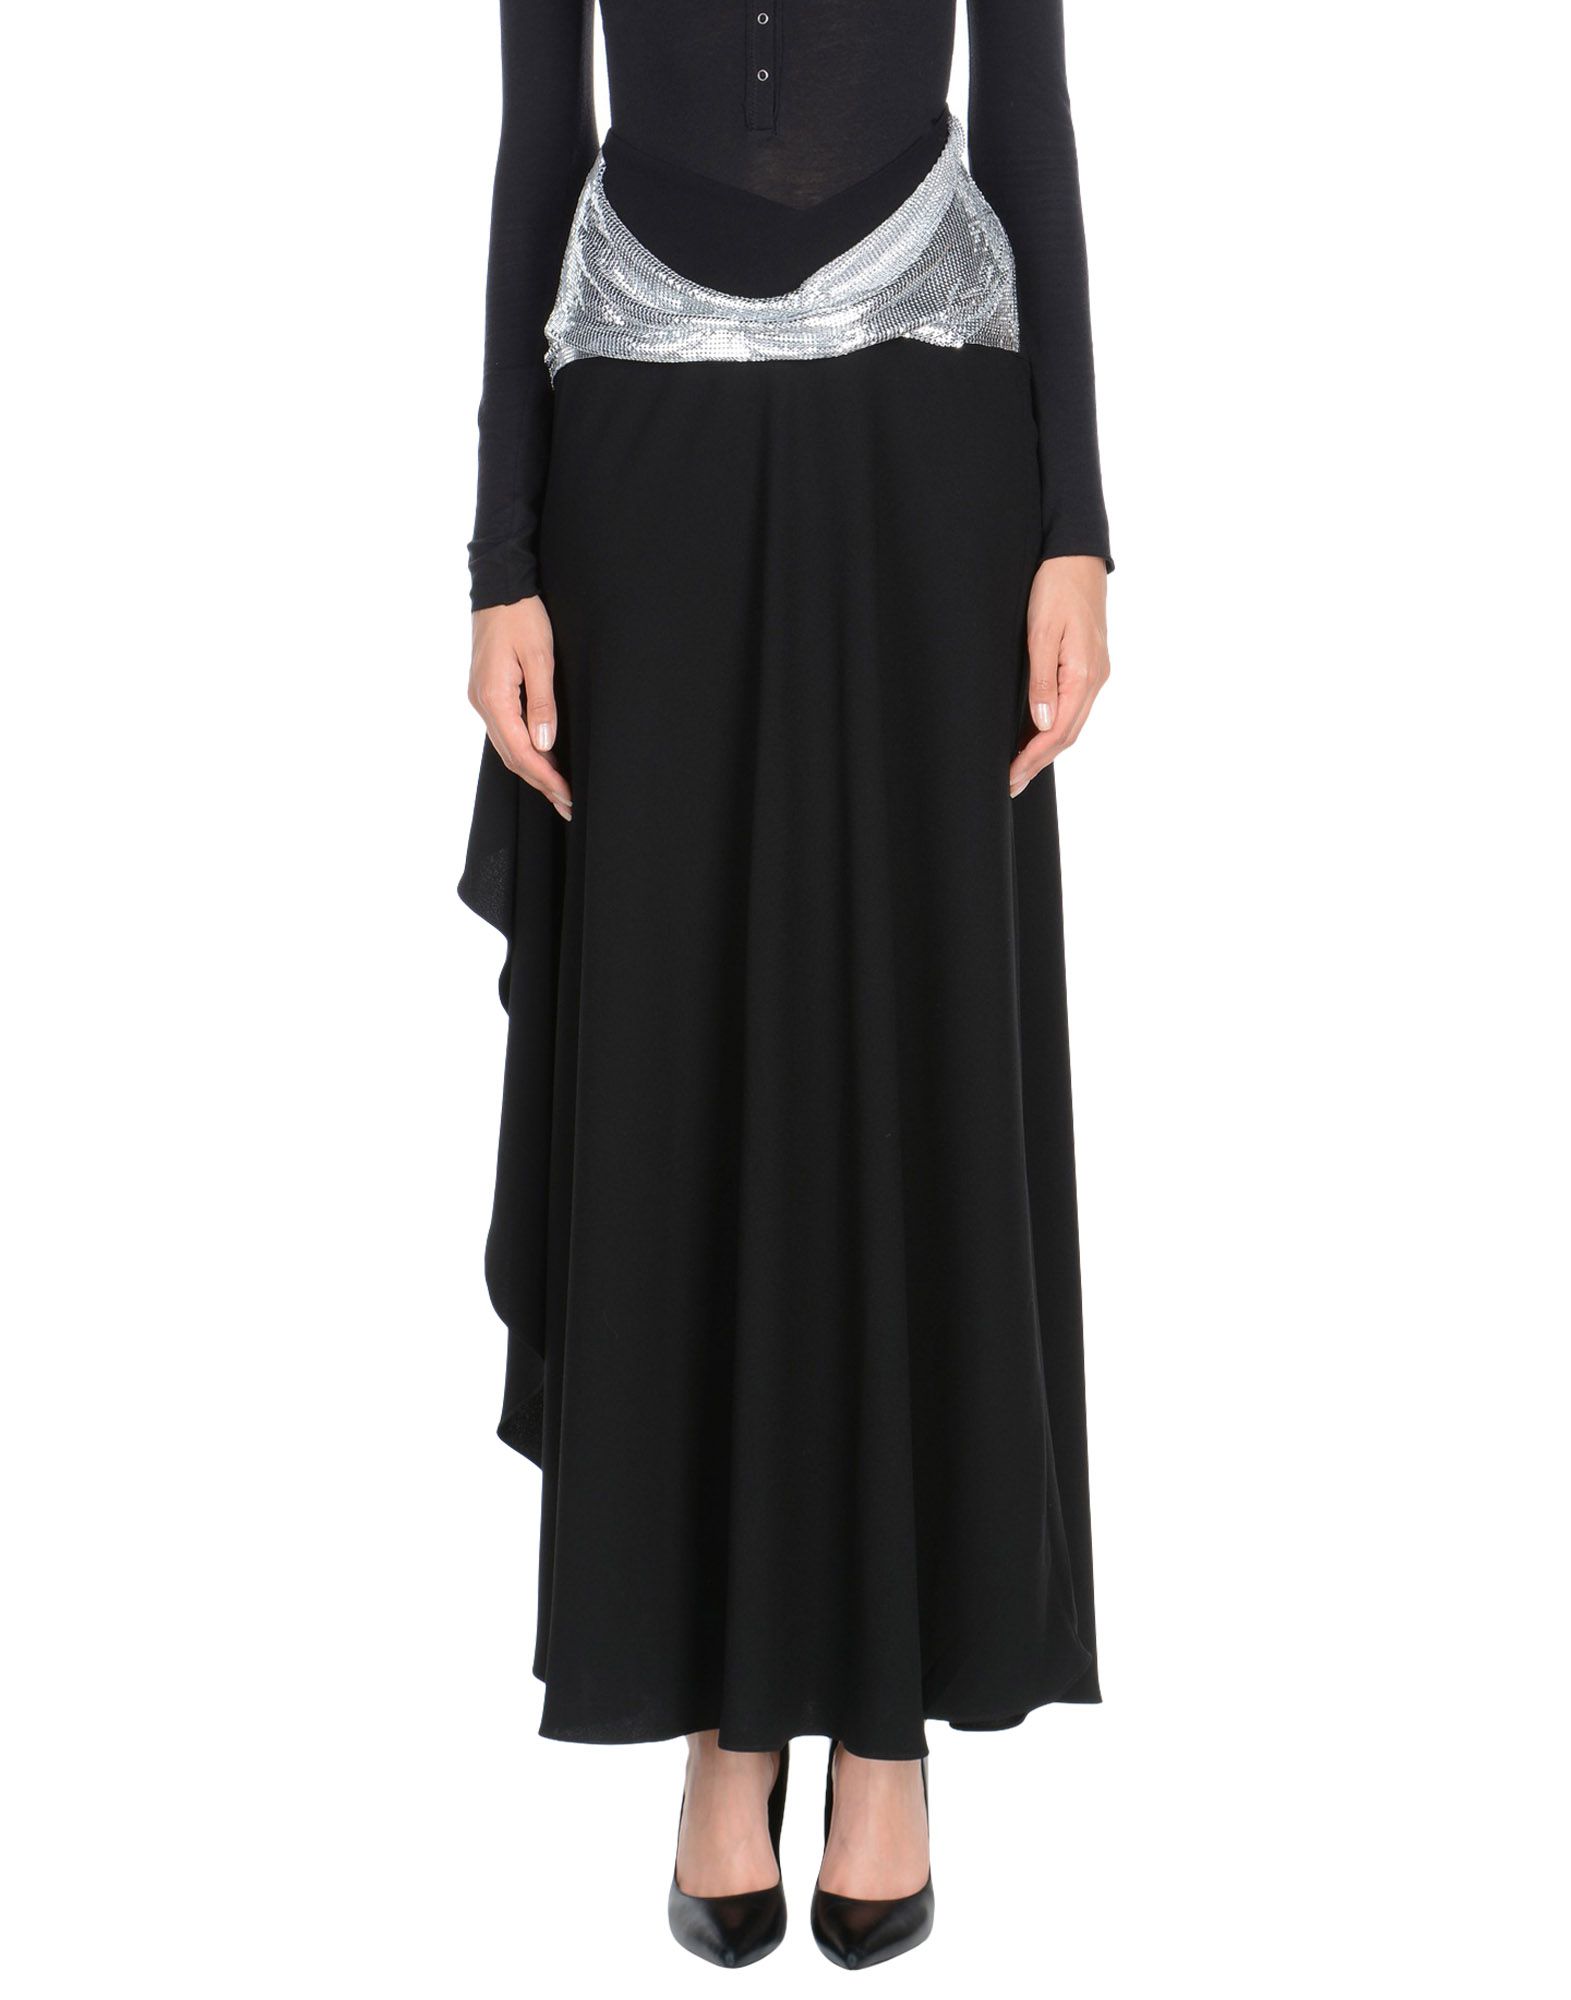 JW ANDERSON LONG SKIRTS,35379403UX 5